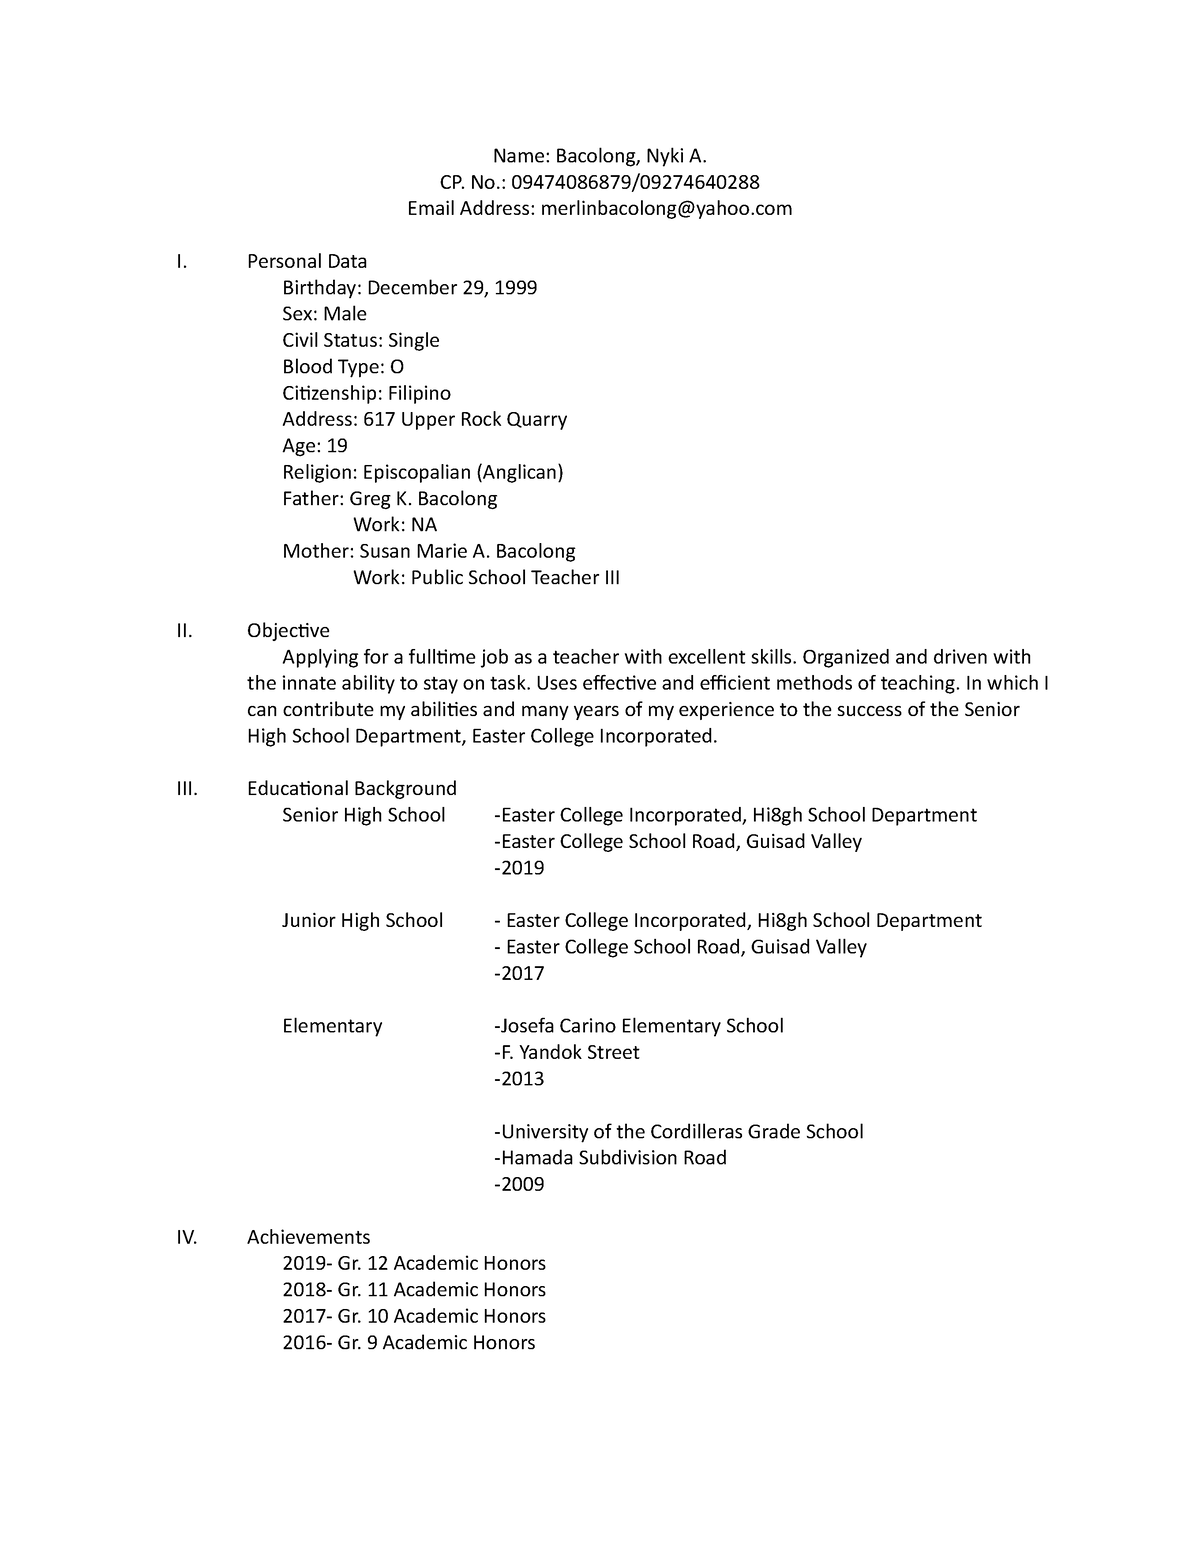 Immersion Resume and Application Letter - Name: Bacolong, Nyki A. CP ...